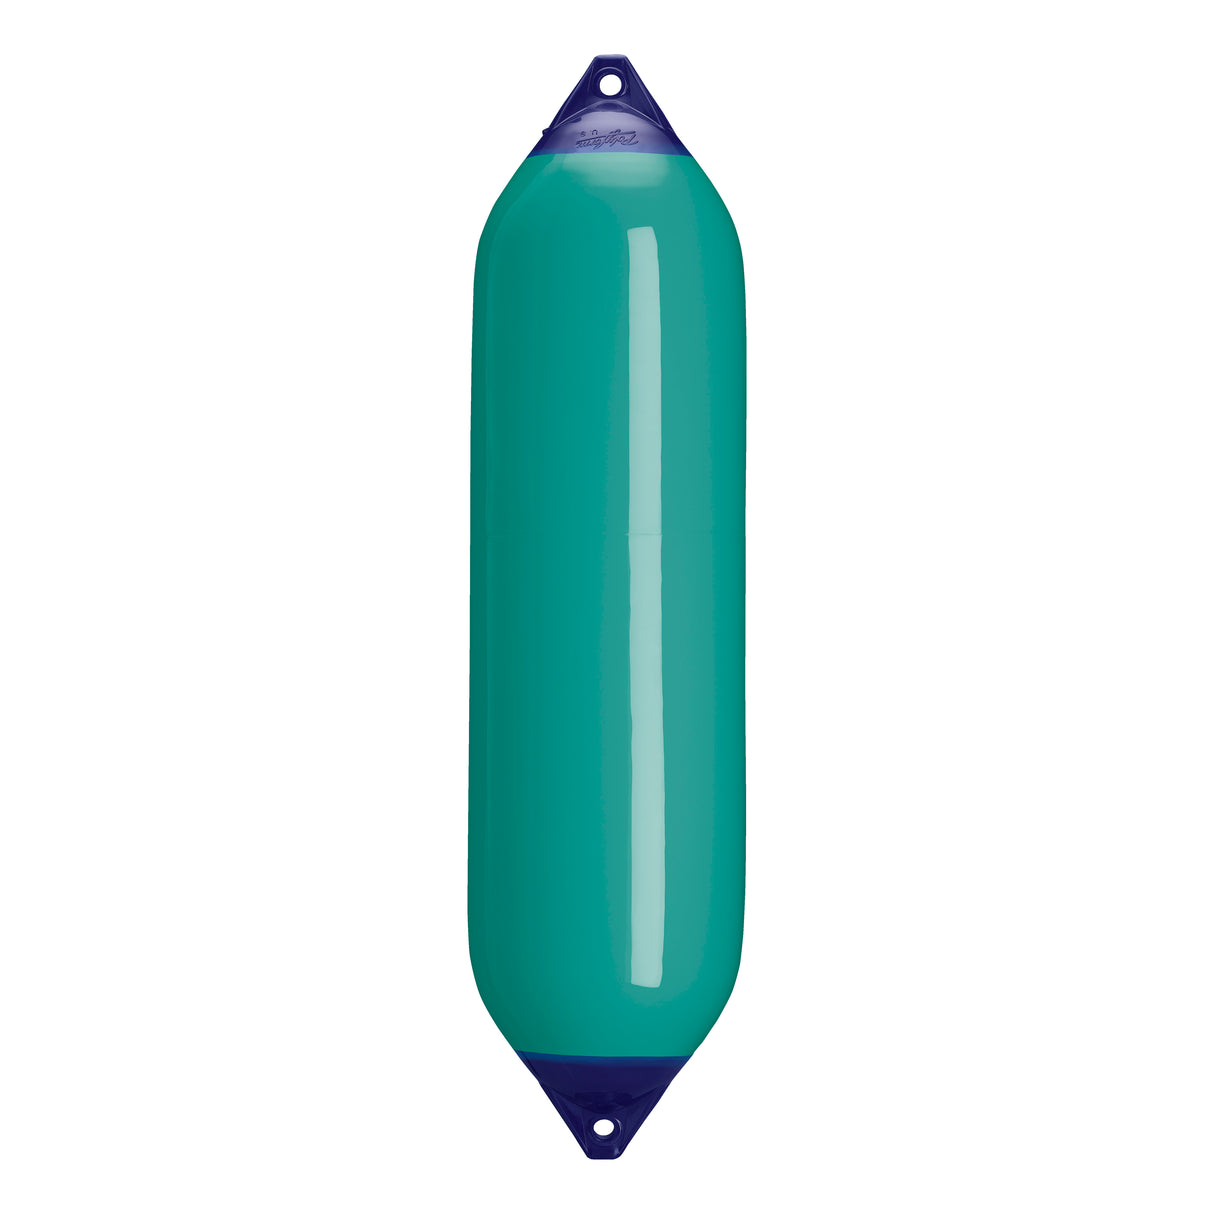 Teal boat fender with Navy-Top, Polyform F-8 